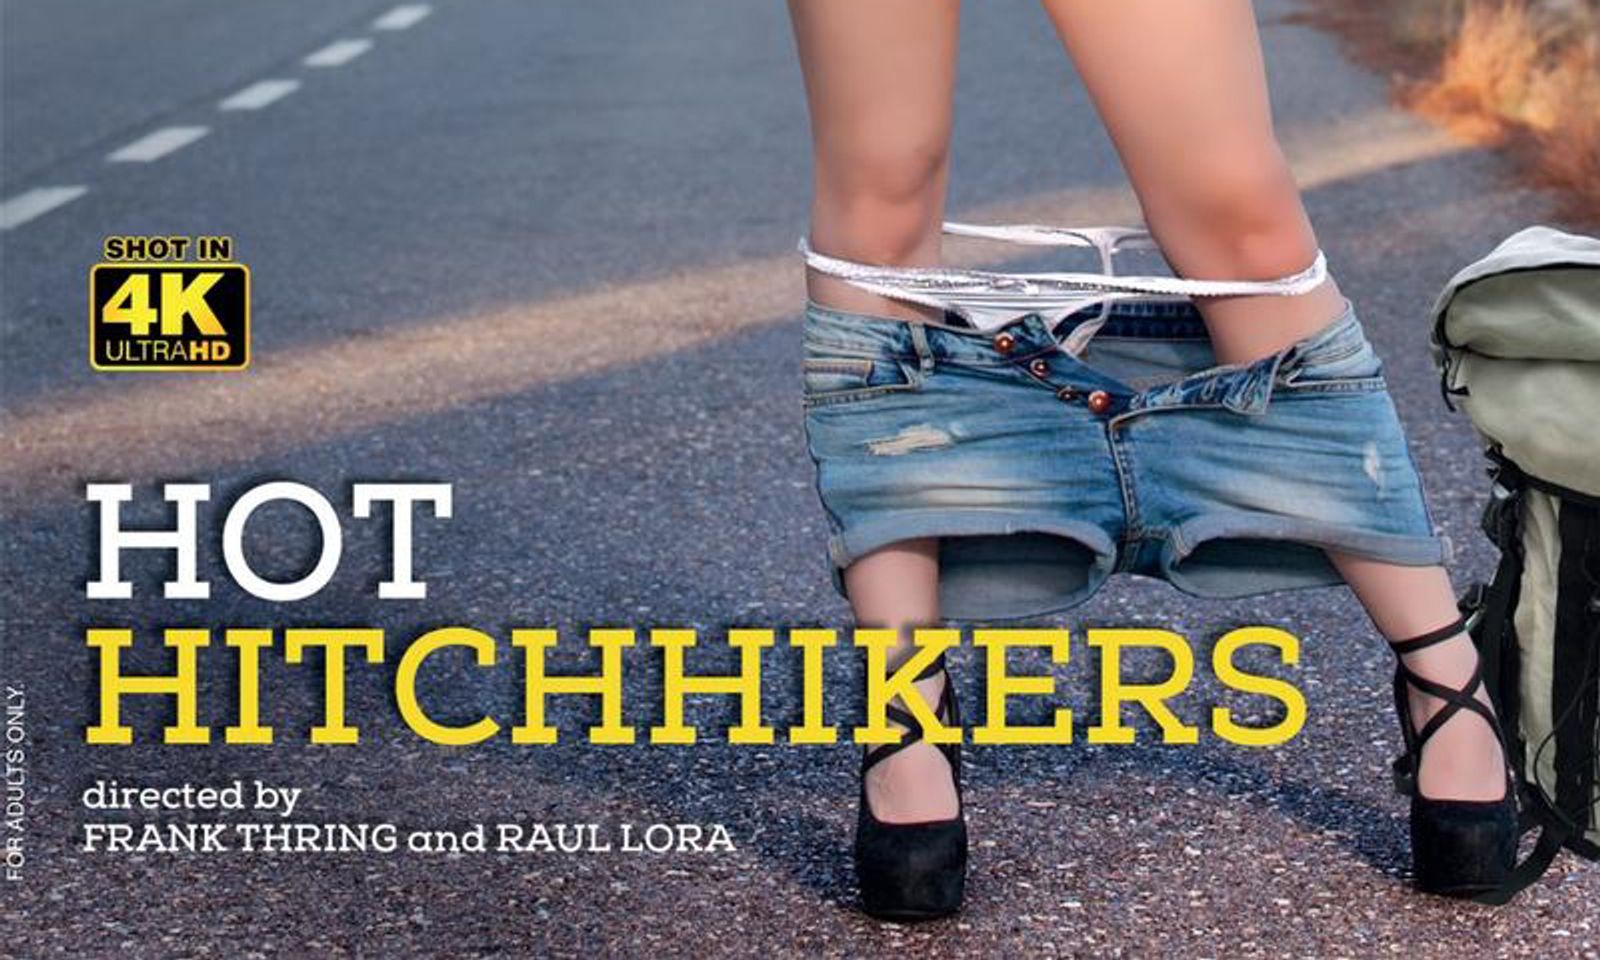 Private's ‘Hot Hitchhikers’ to Hit the Street